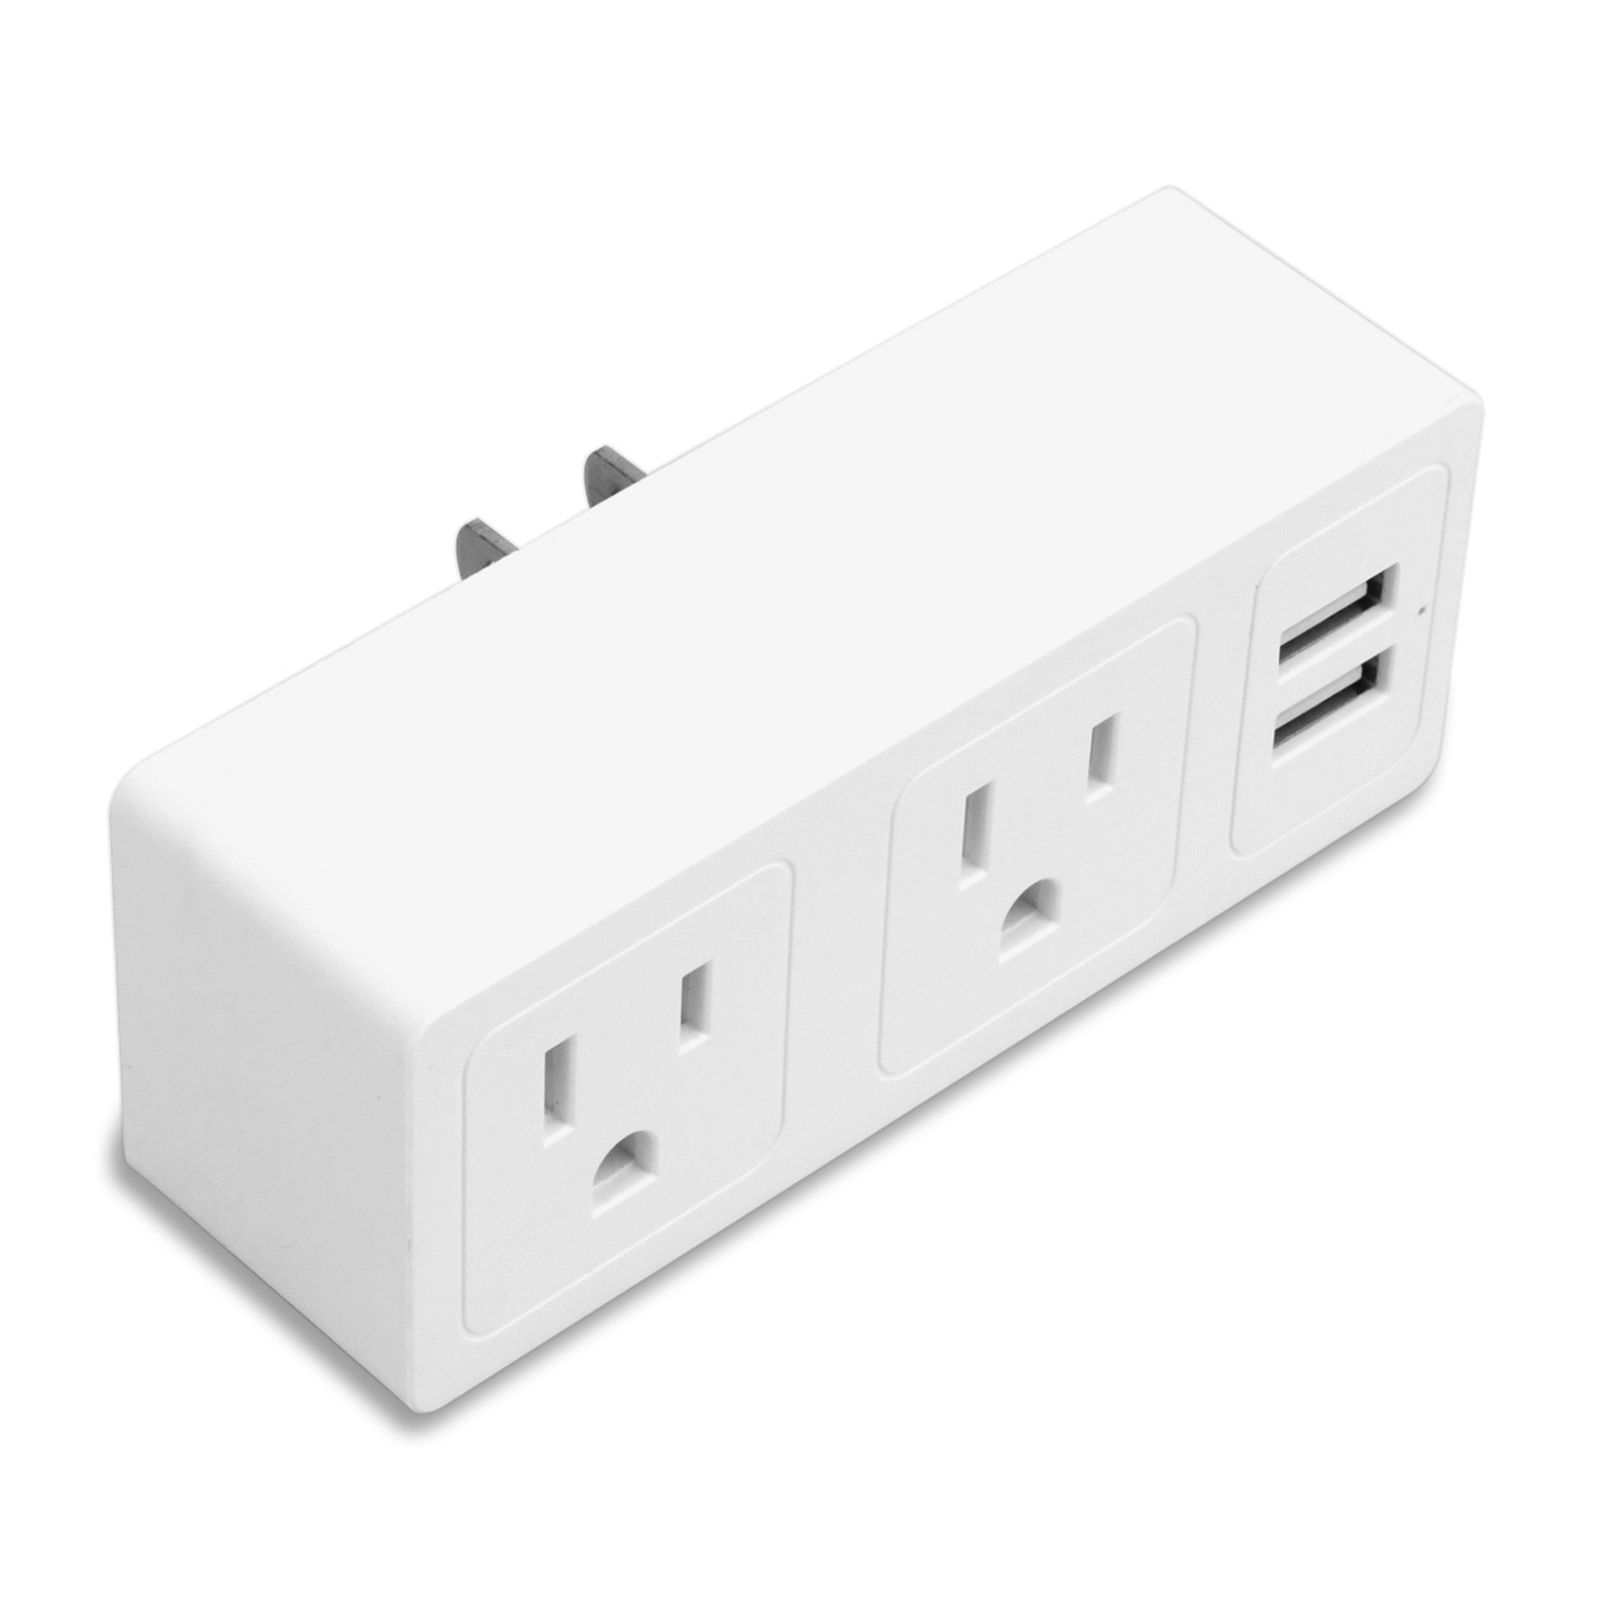 Power Clap Noise Detecting Wall Outlet Extender Strip